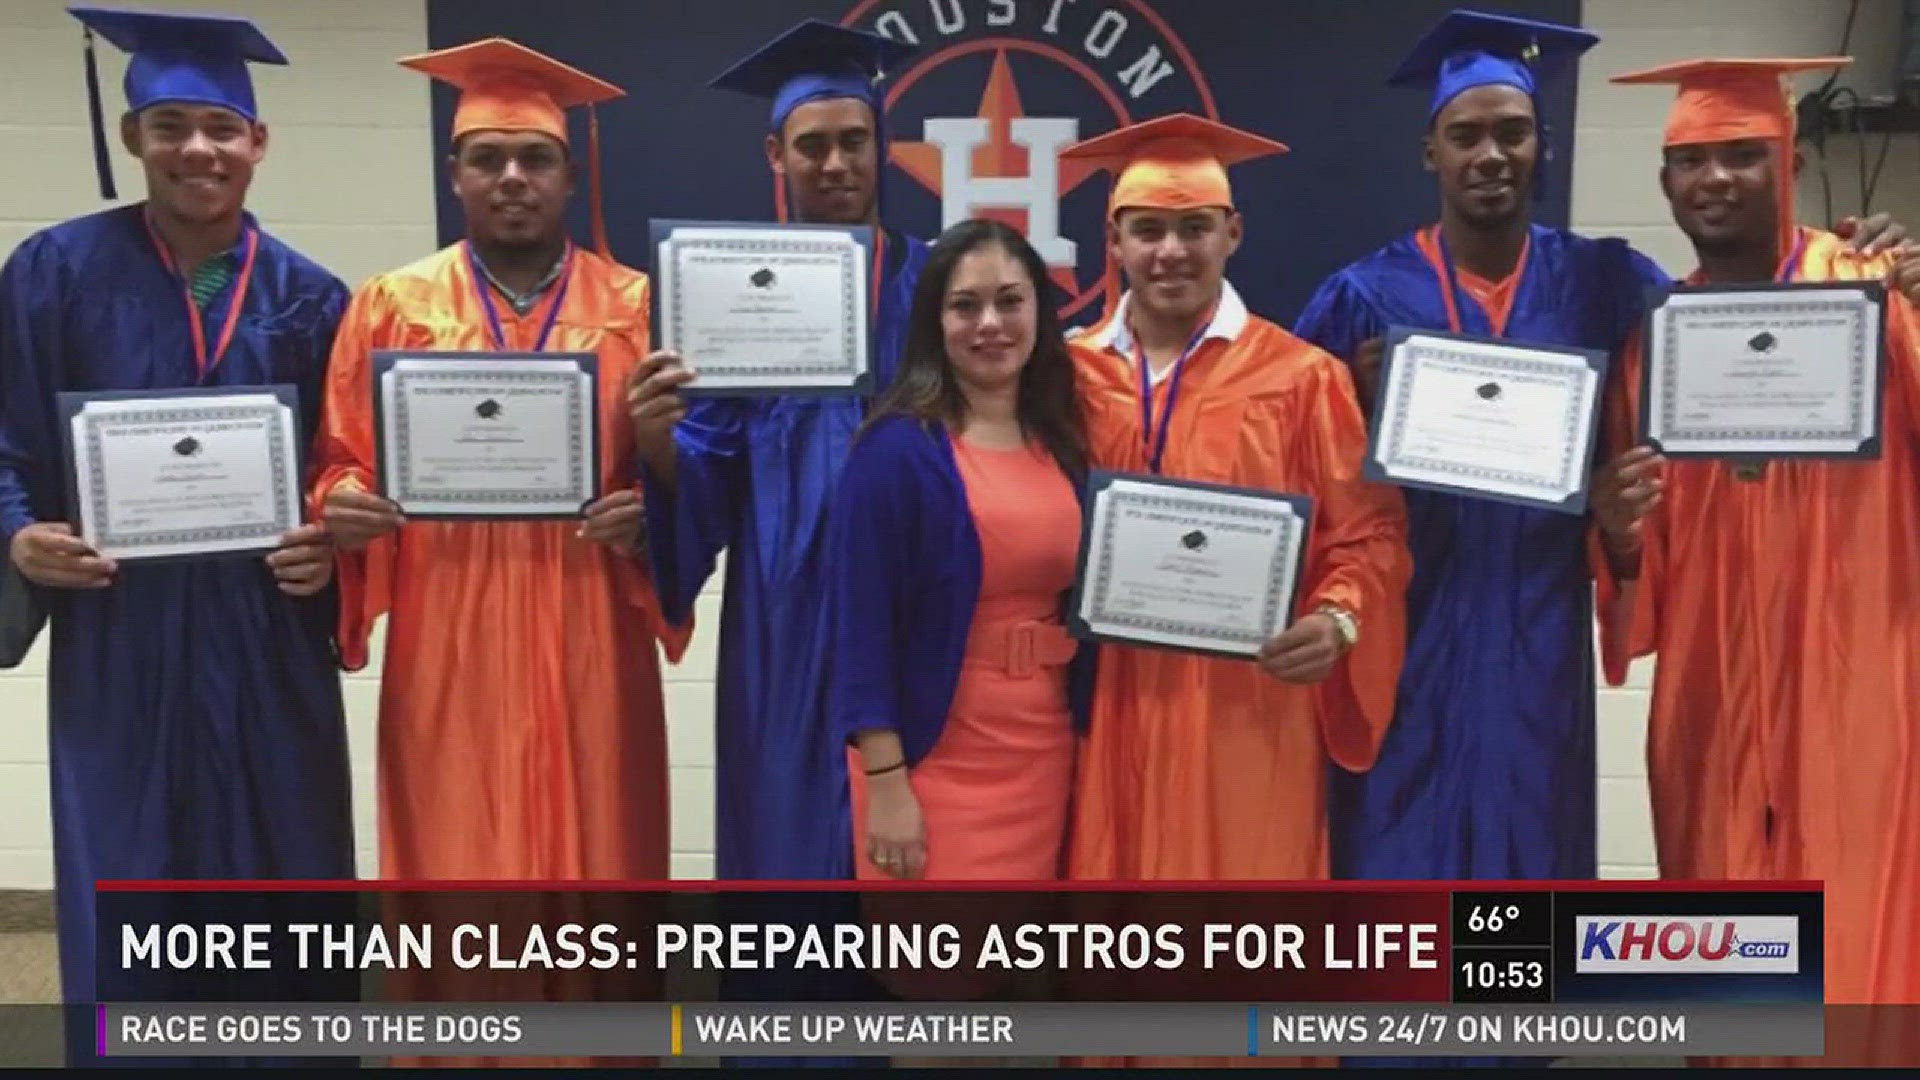 See how the organization is preparing Astros for life - a program which has helped players like Jose Altuve and countless others you've never even heard of.